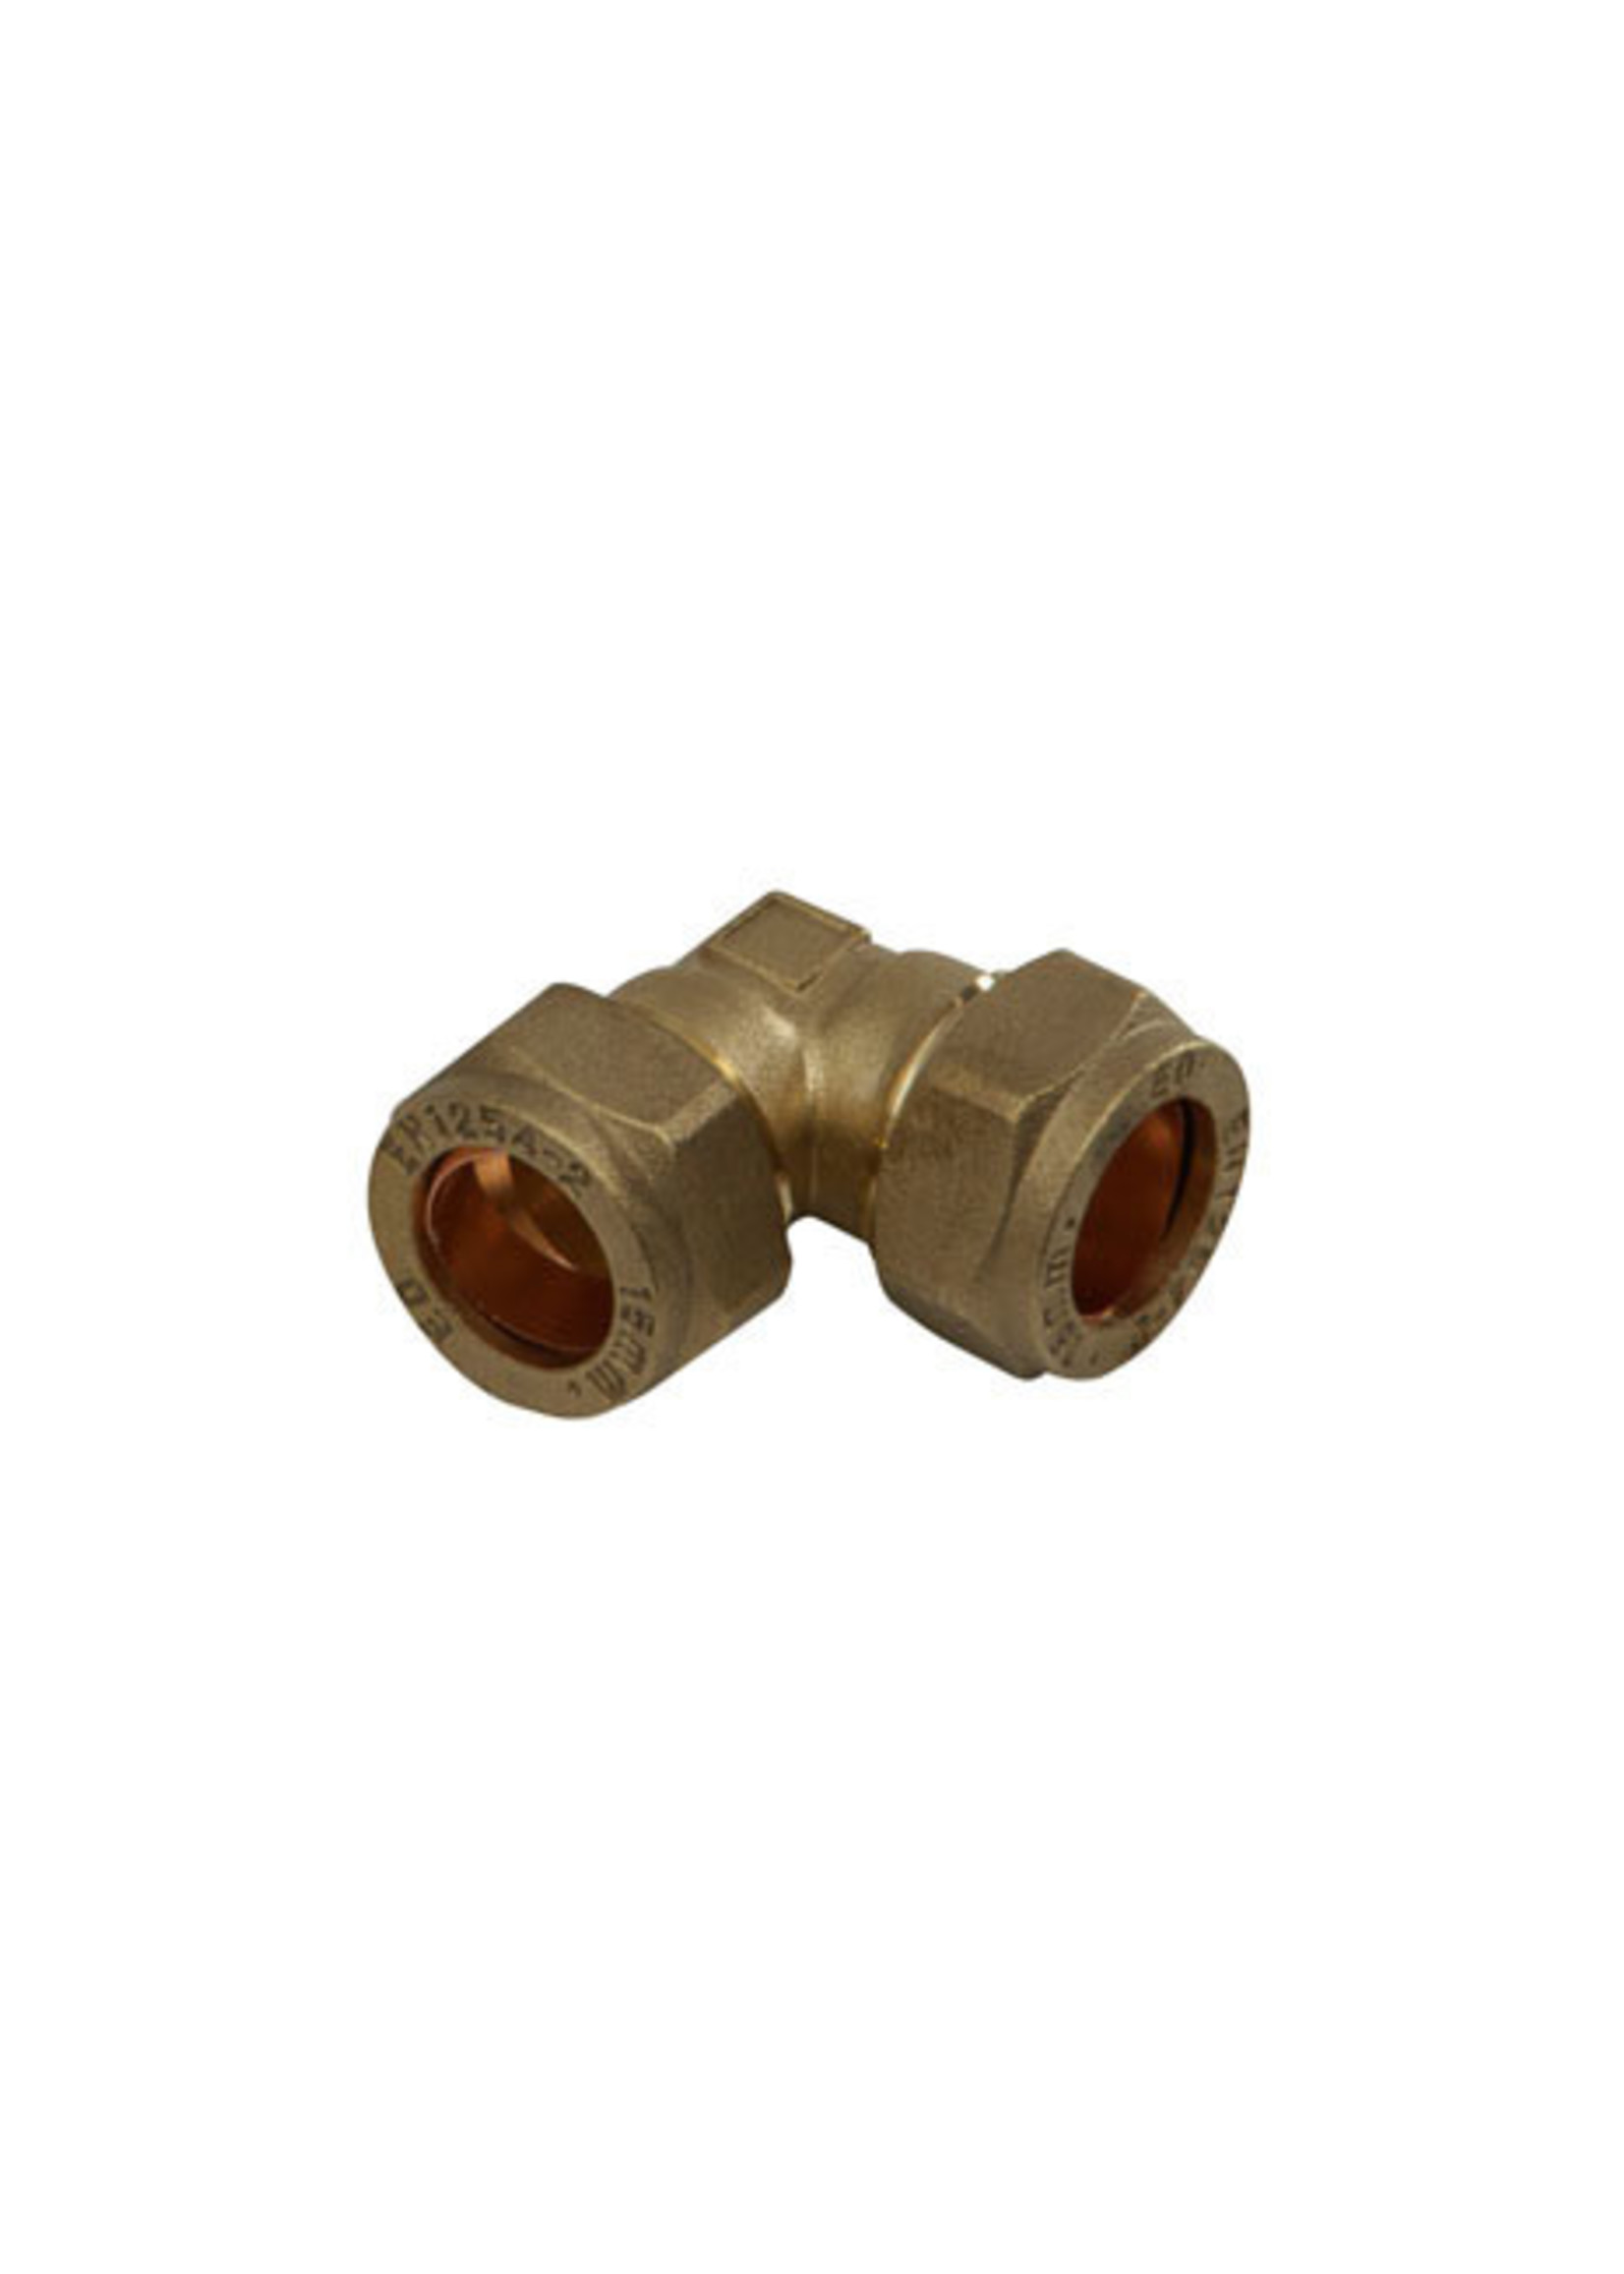 Securplumb WRAS Compression Elbow 15mm Brass